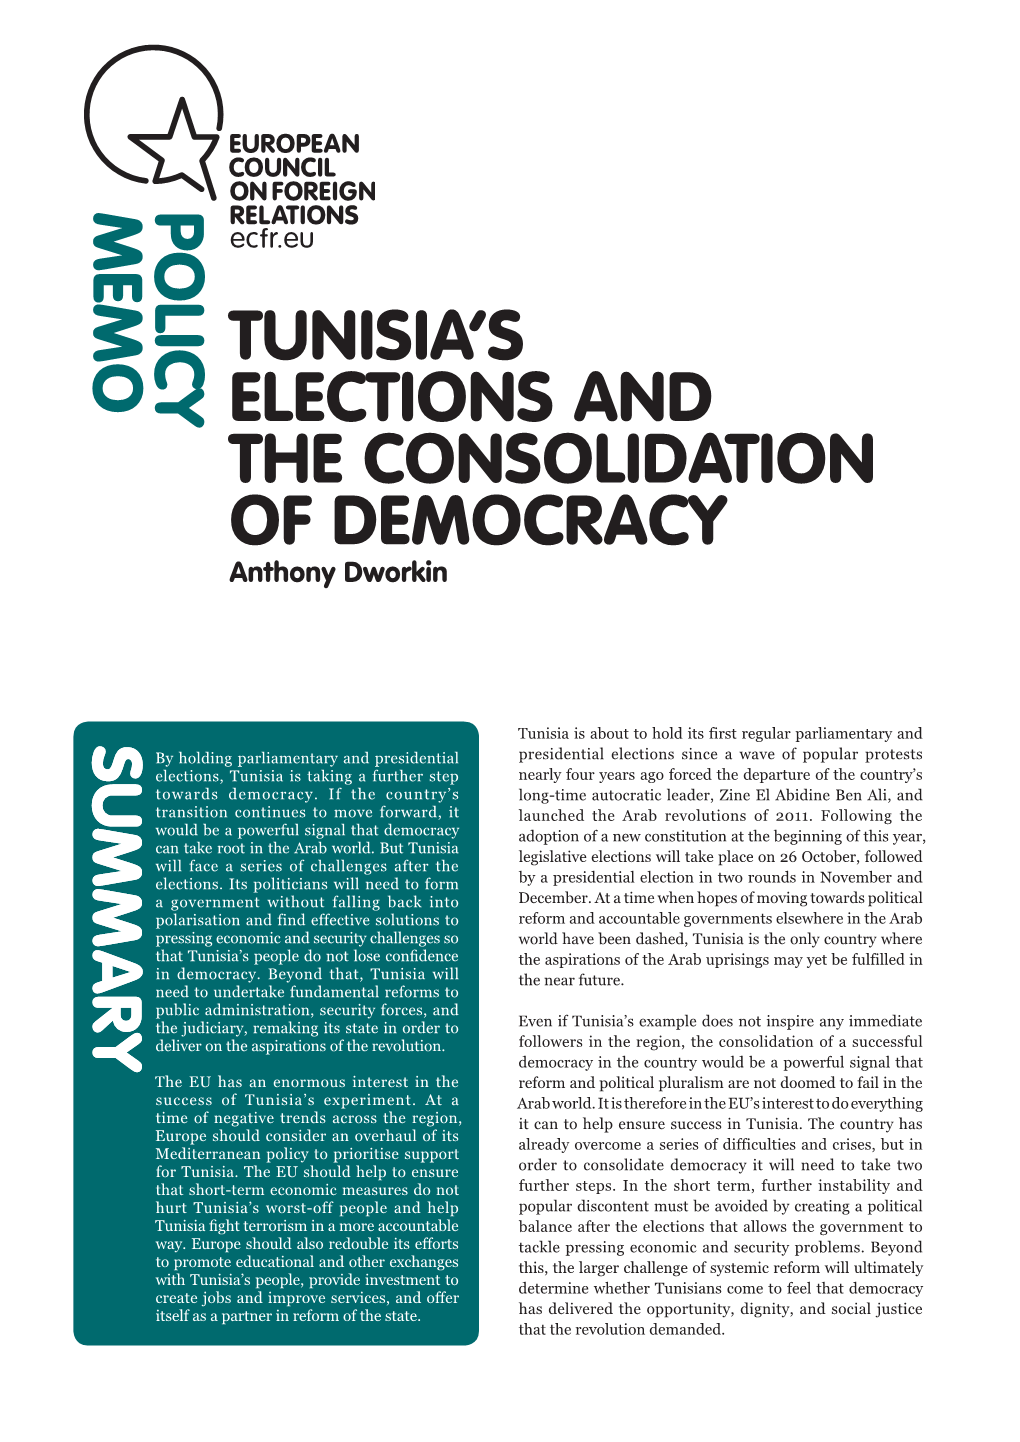 Tunisia's Elections and the Consolidation of Democracy